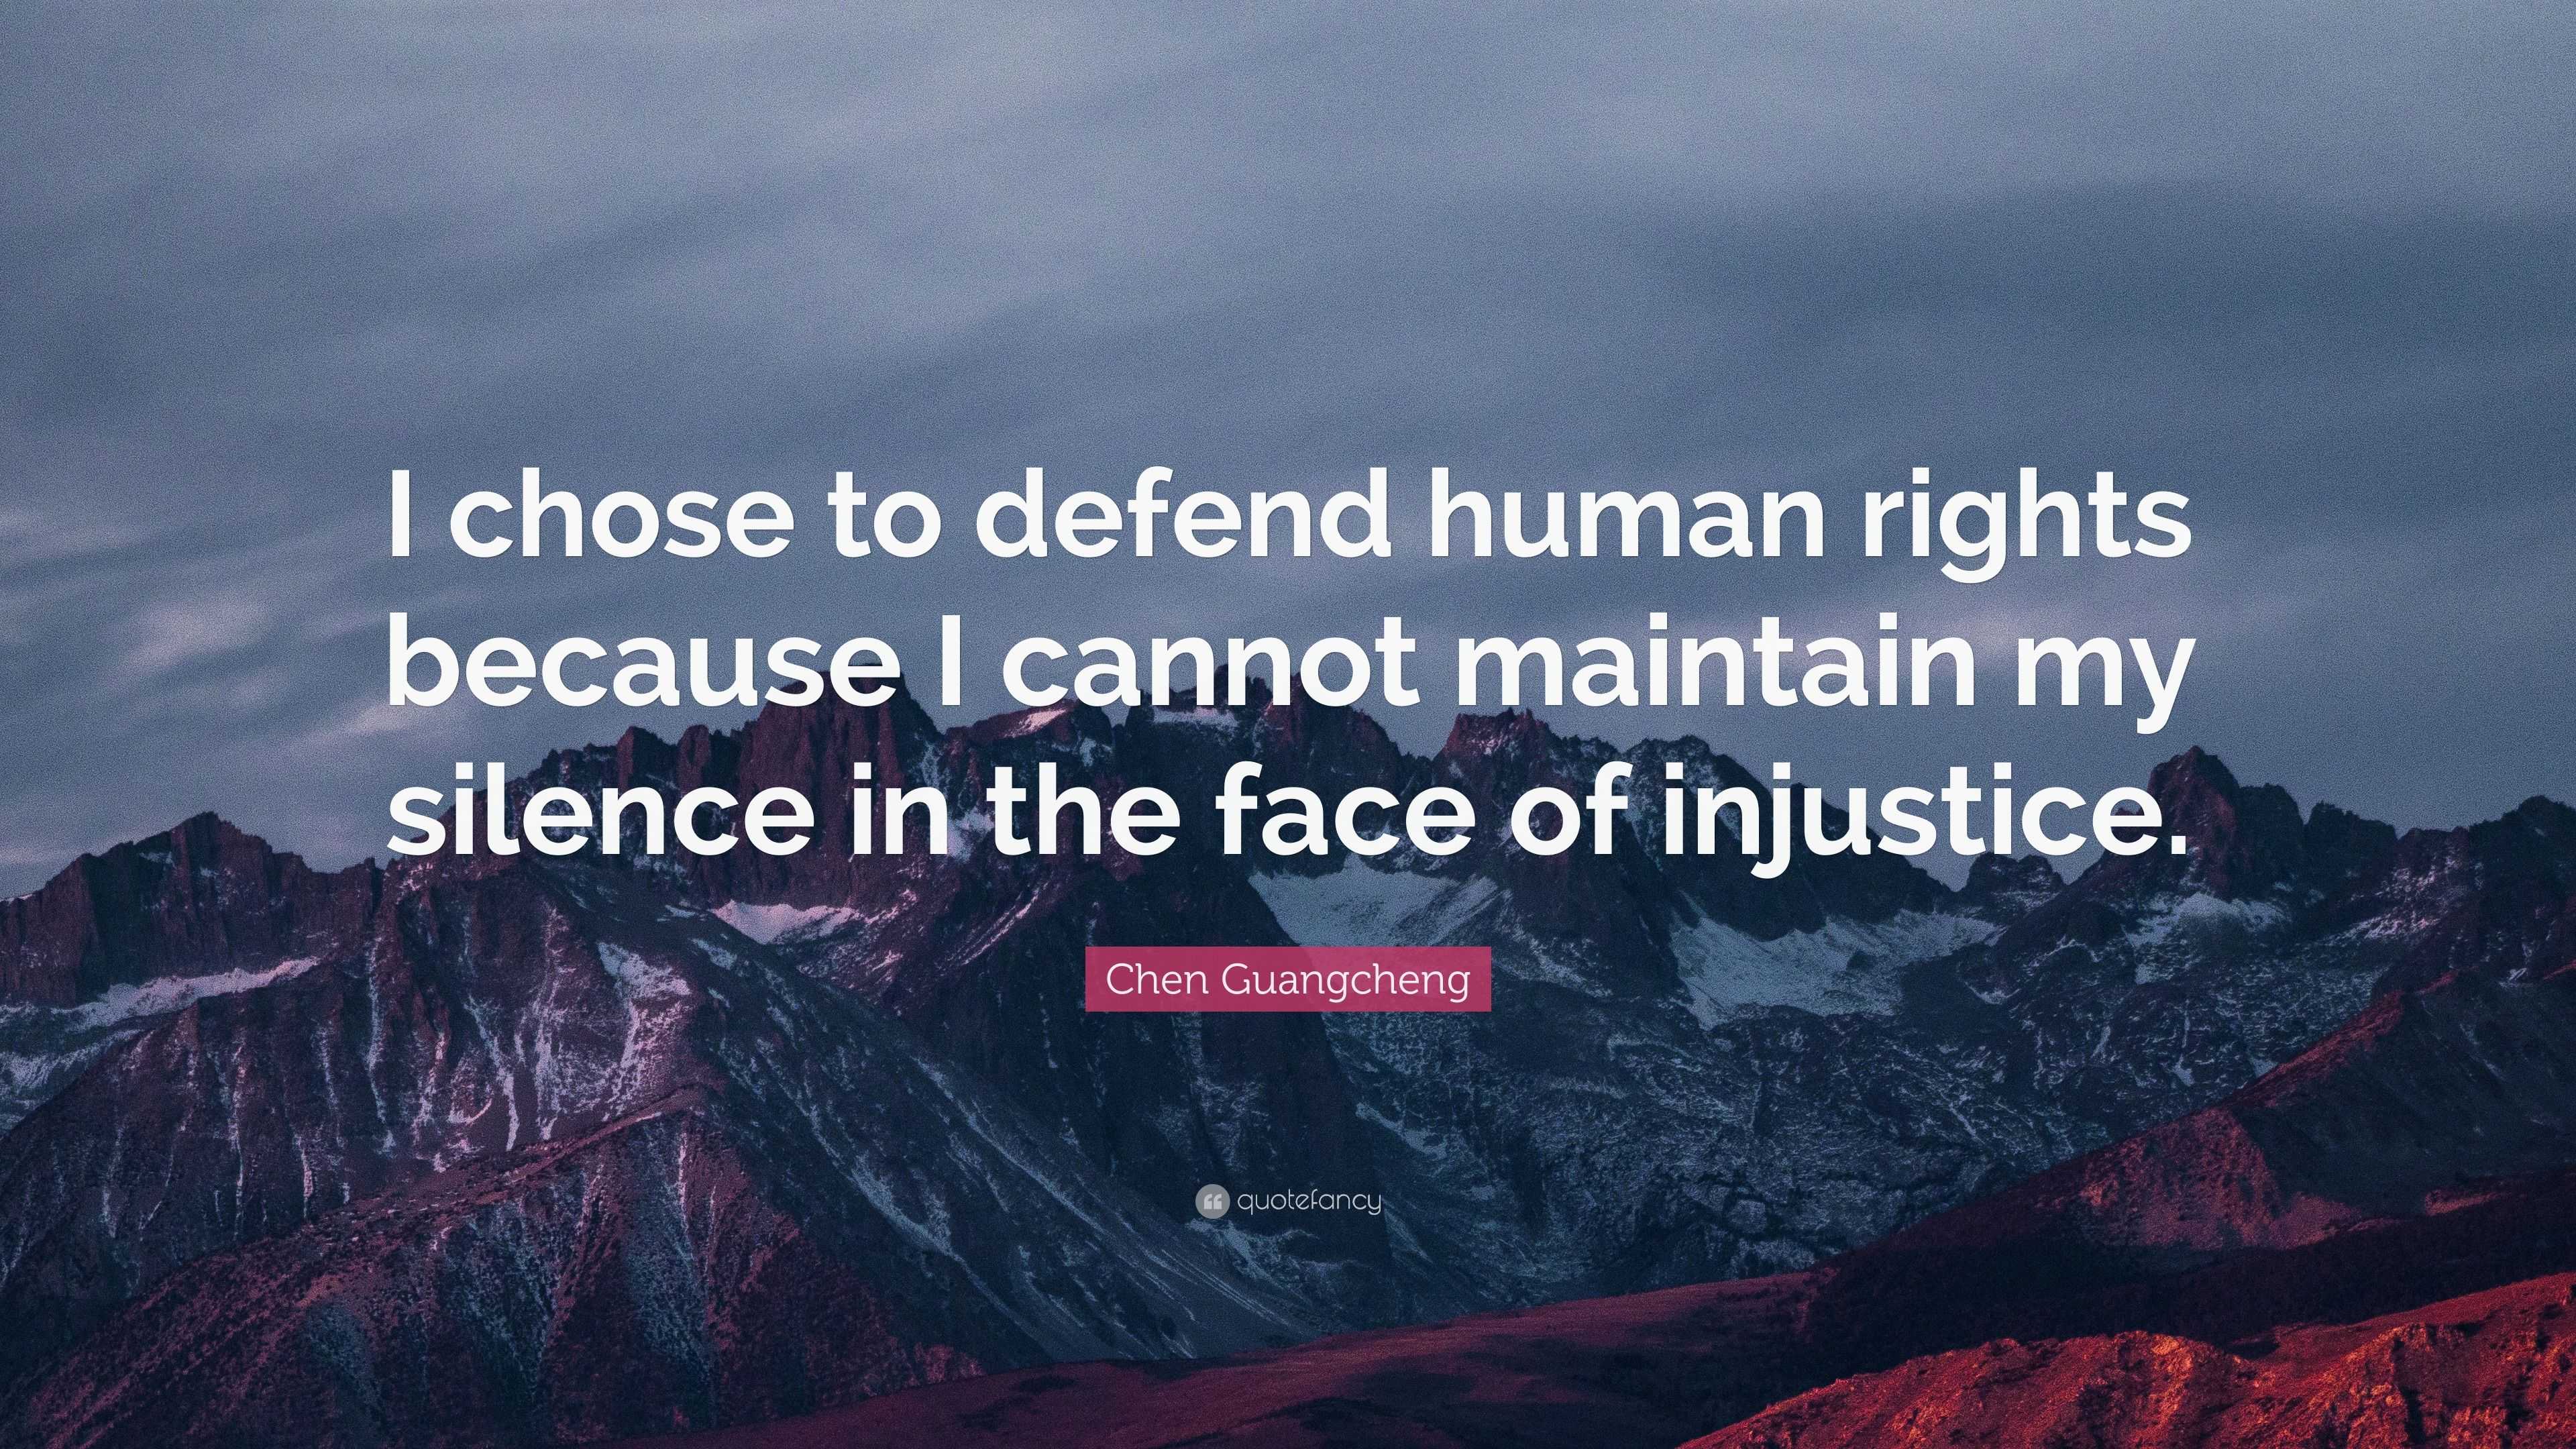 Chen Guangcheng Quote: “I chose to defend human rights because I cannot ...